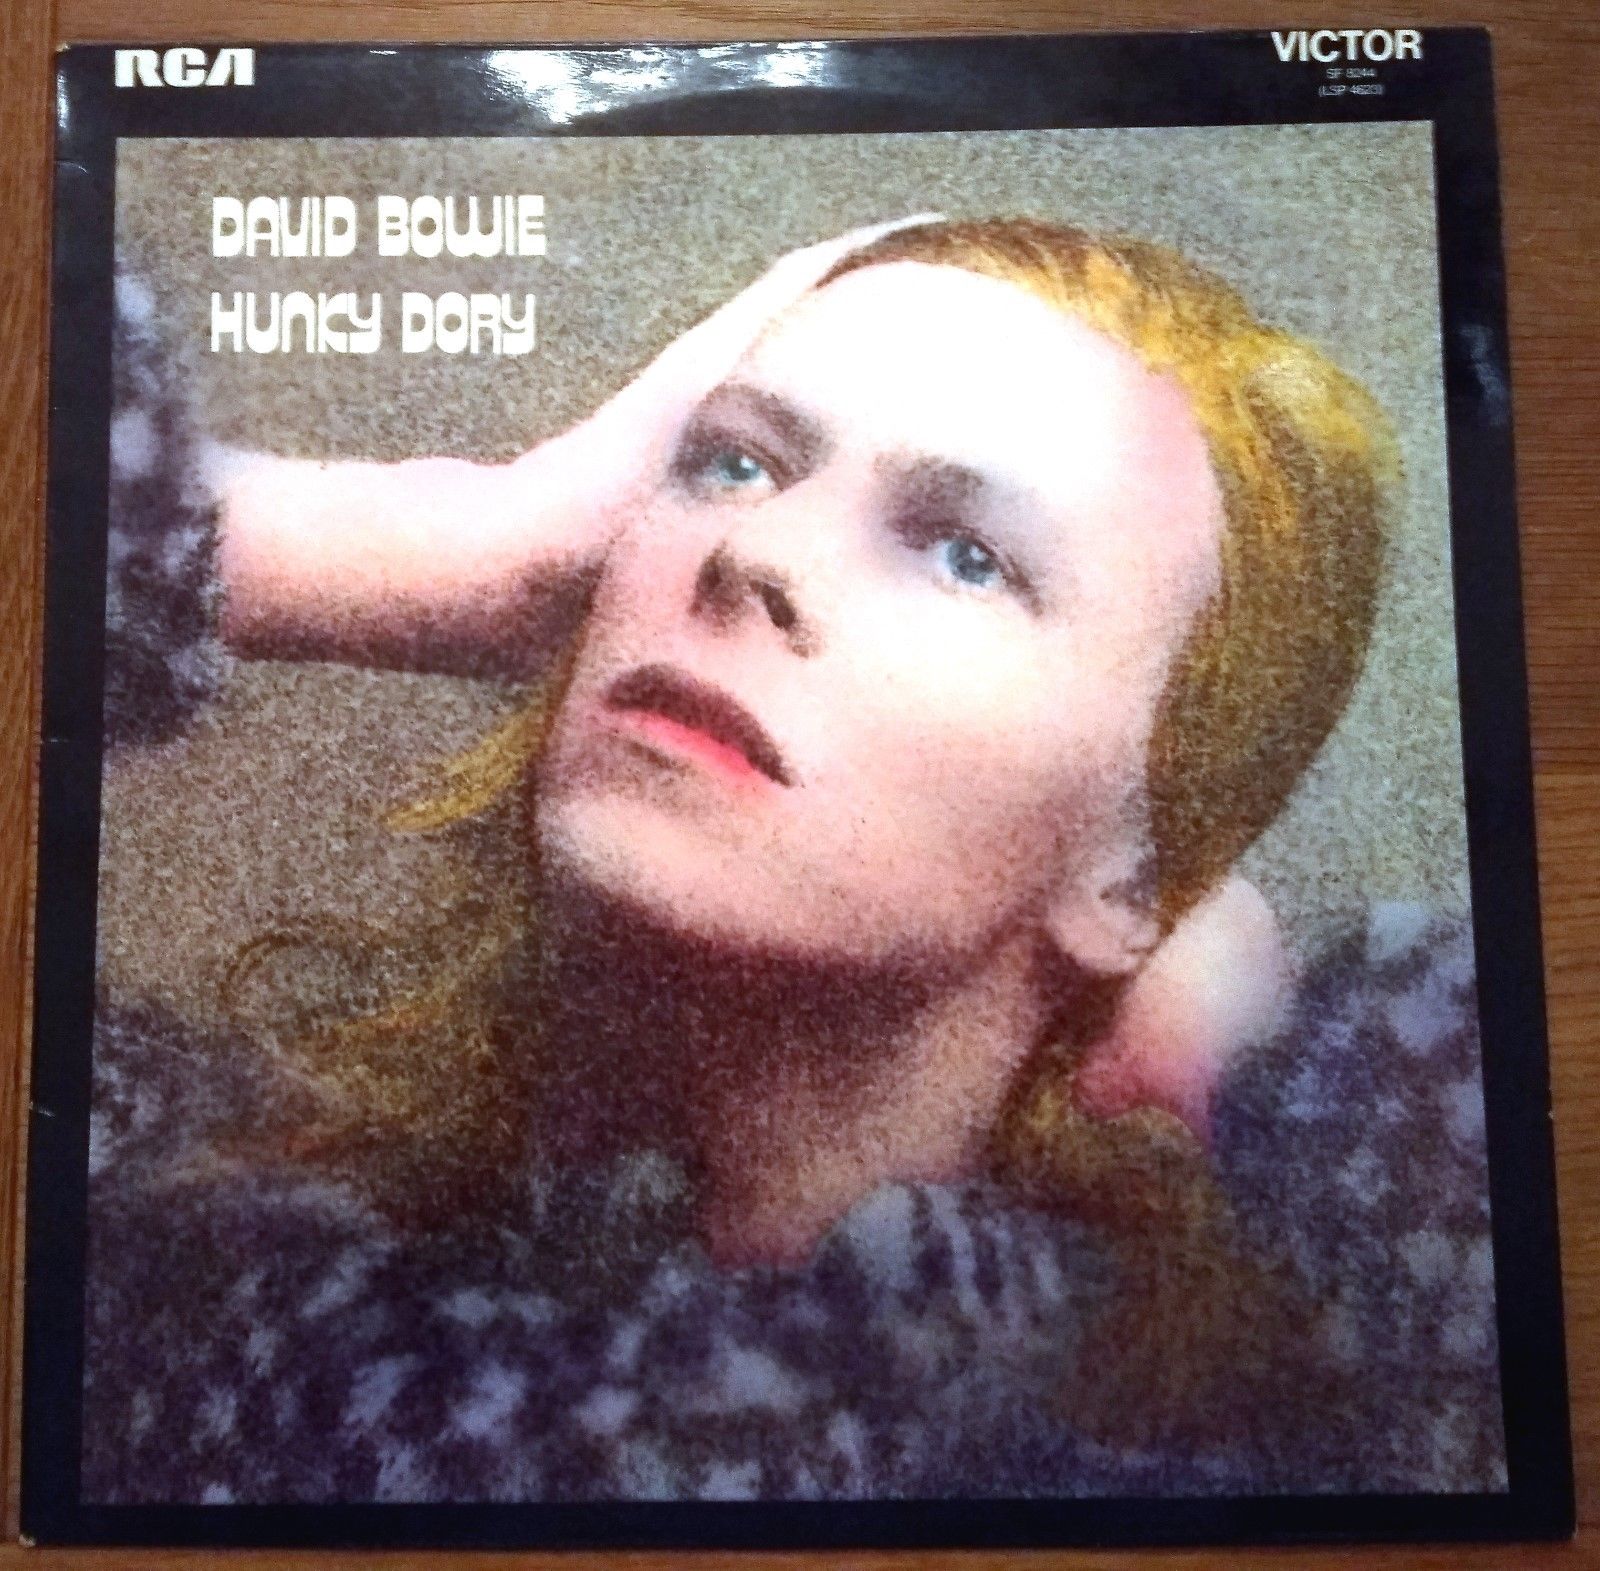 ORIGINAL DAVID BOWIE CLASSIC HUNKY DORY VINYL LP ON RCA  VICTOR SF8244 FROM 1971